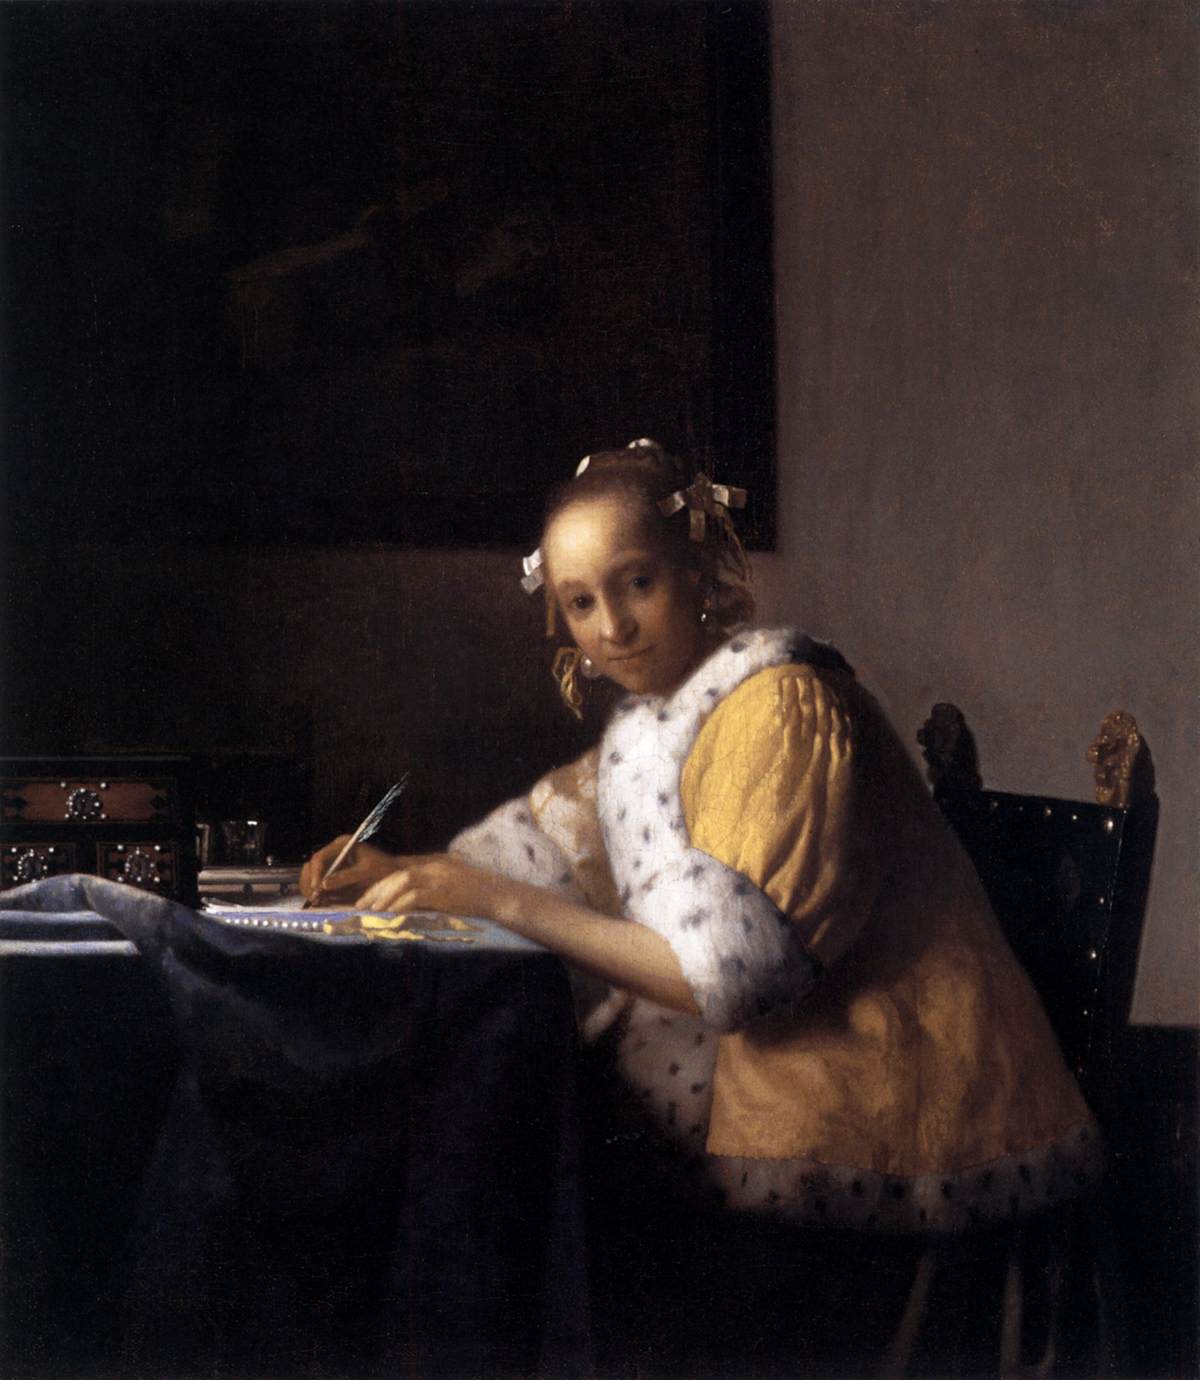  Johannes Vermeer, Donna che scrive una lettera, 1665-66, National Gallery of Art